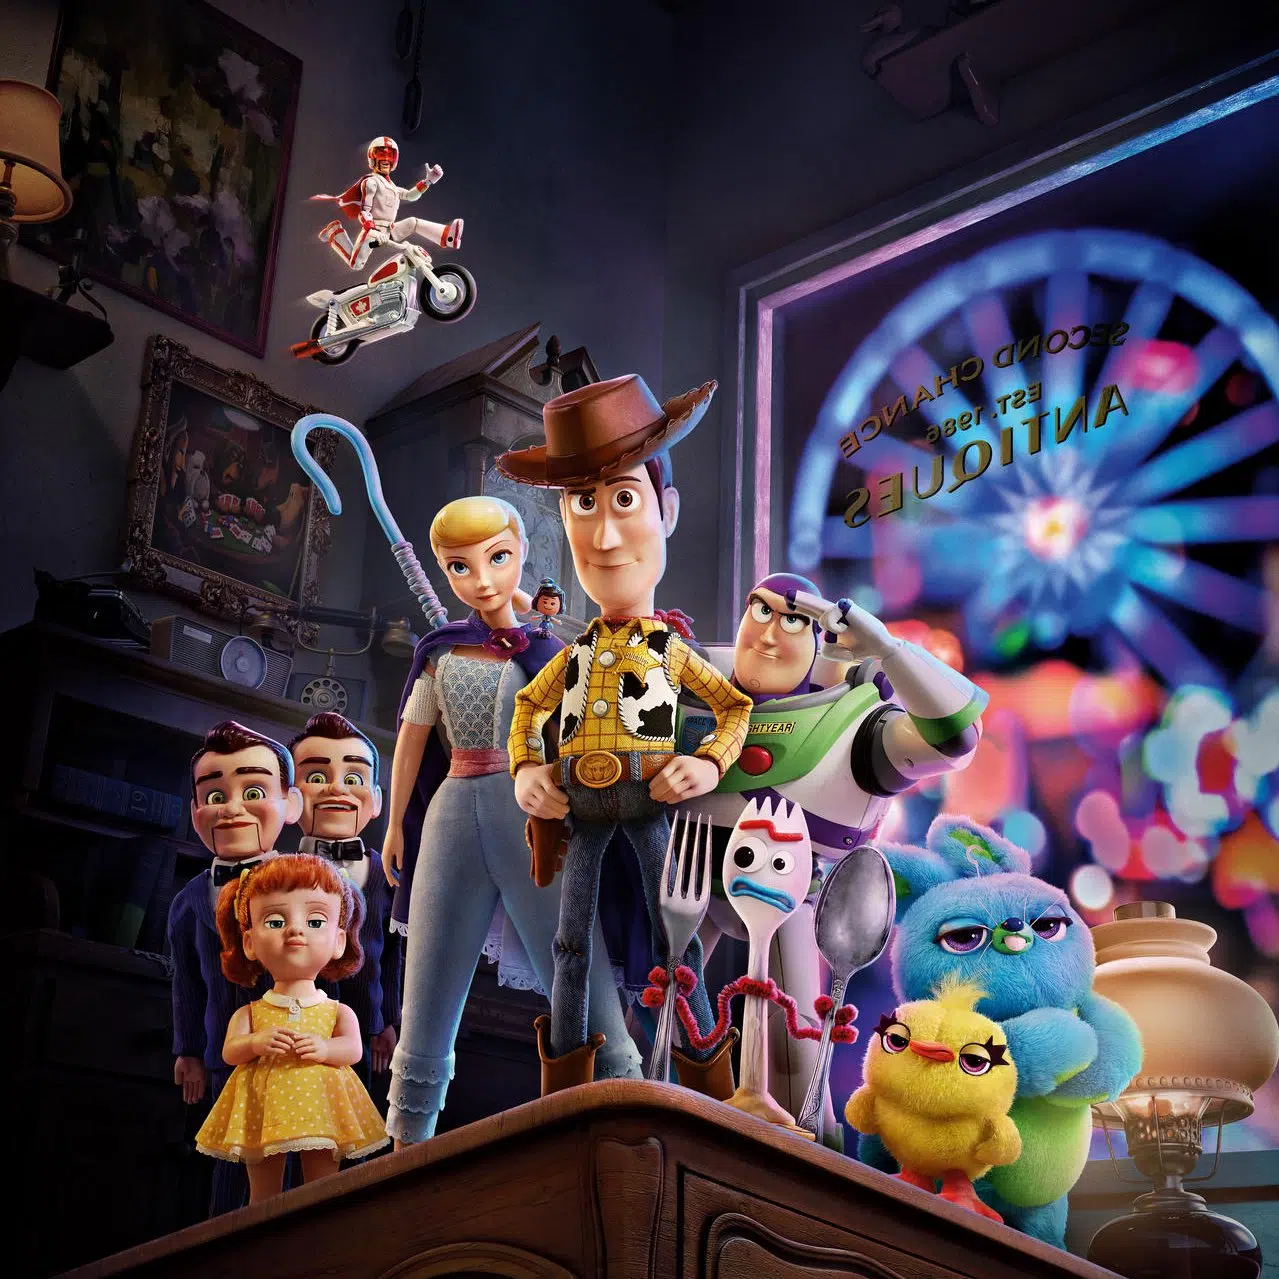 Disney Announces Toy Story, Frozen and Zootopia Sequels Are in the Works